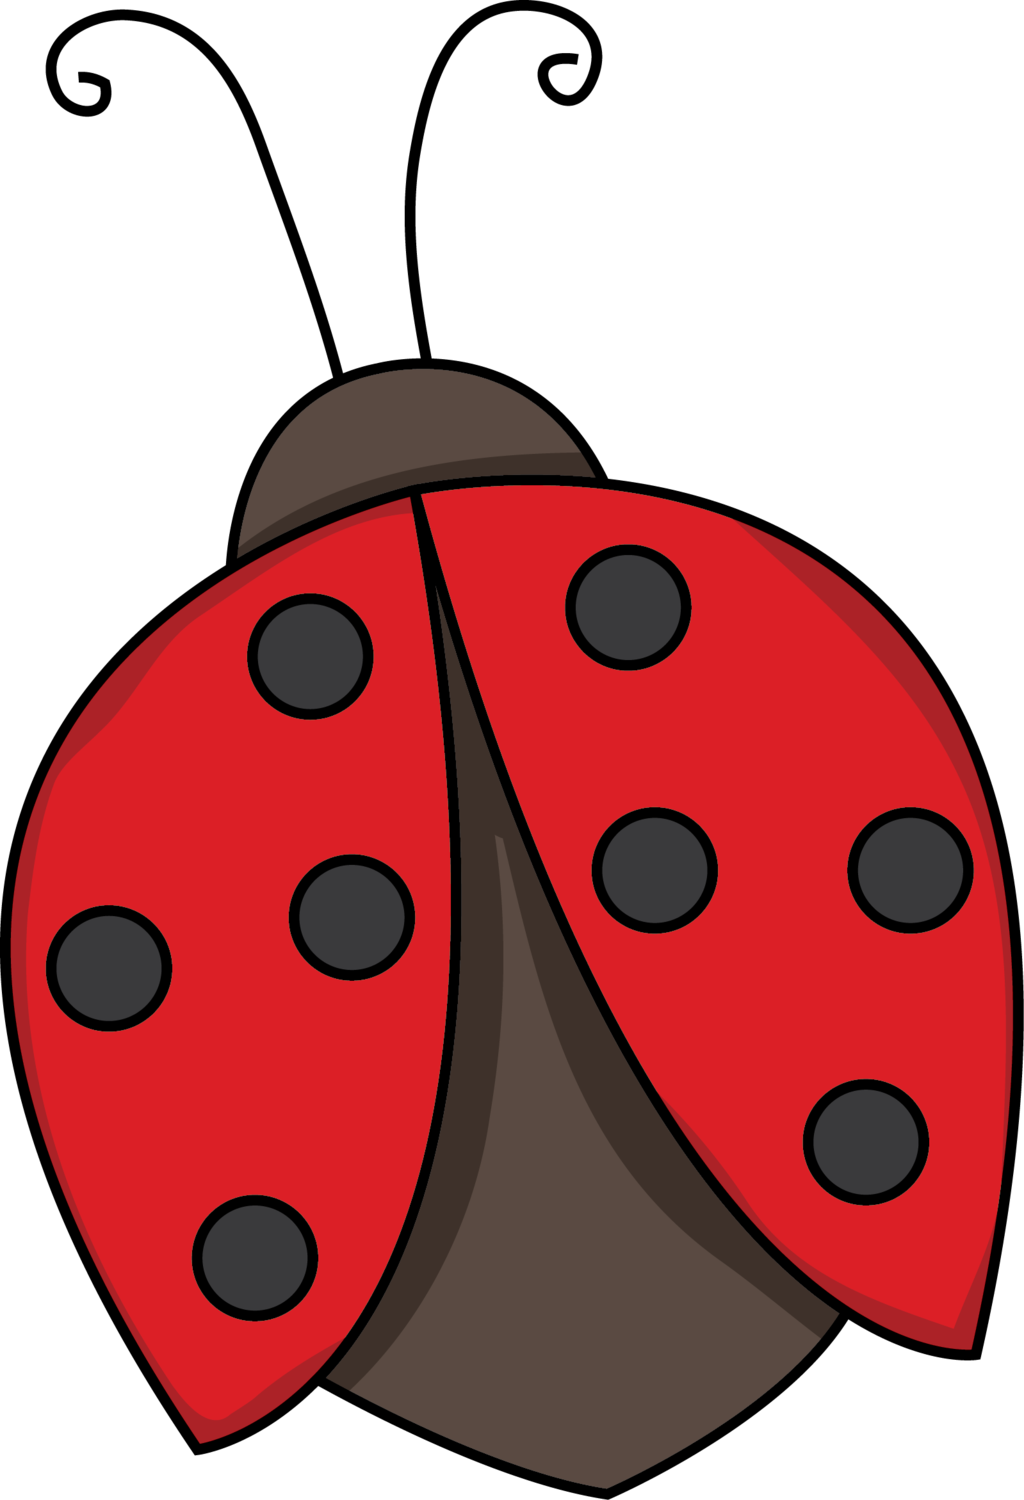 Ladybugs clipart free download on ijcnlp cliparts.